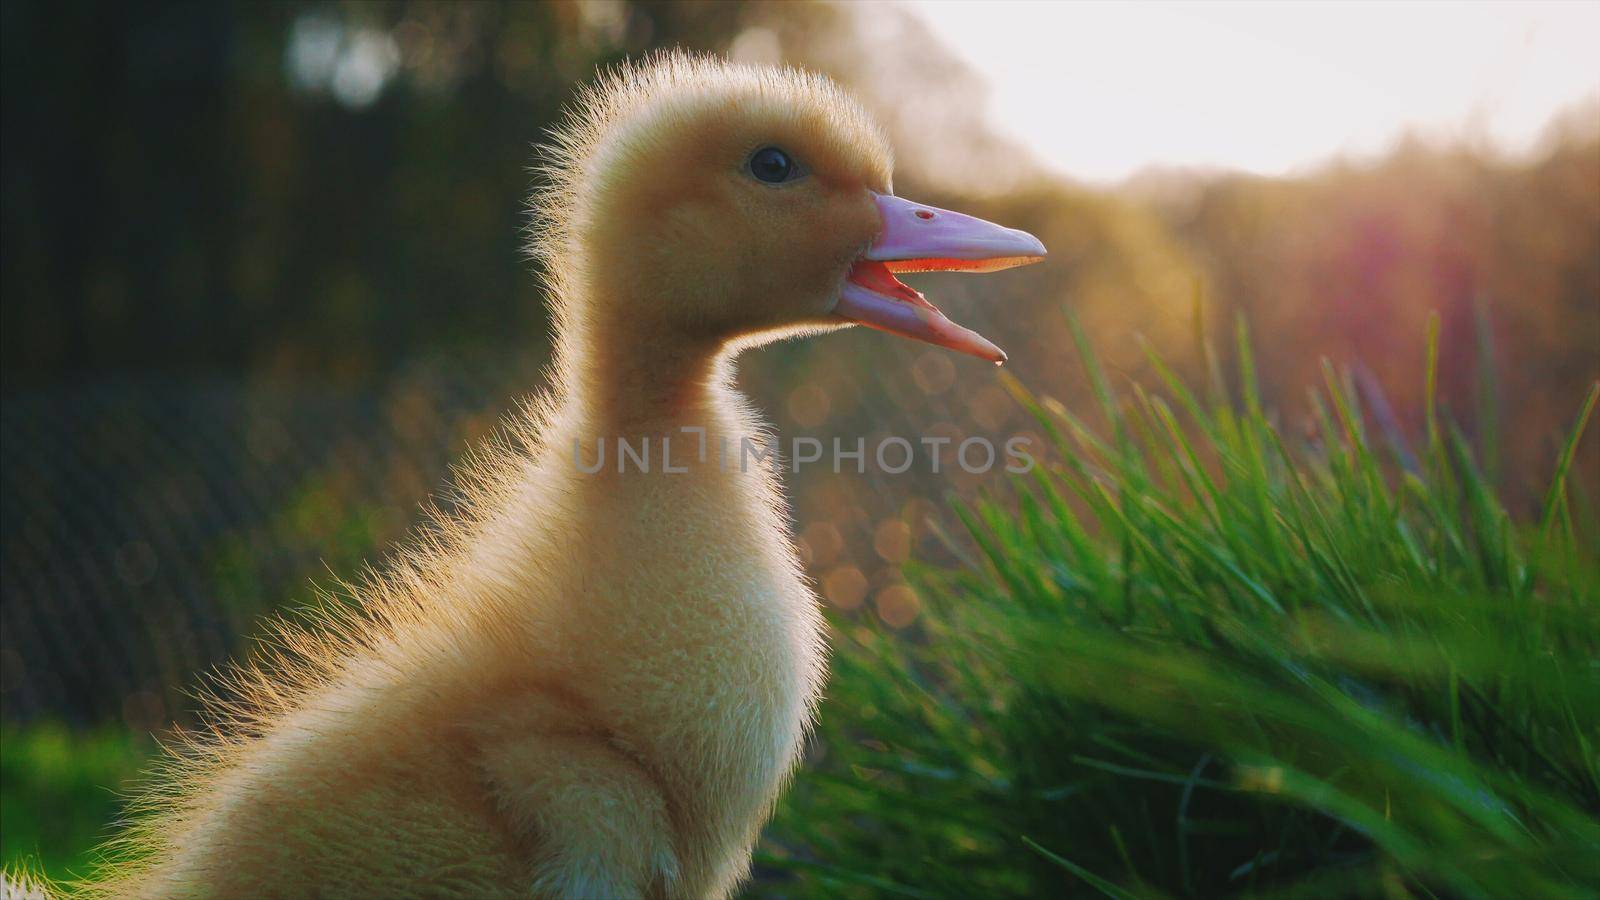 Little yellow duckling on green grass. Funny bird on the farm